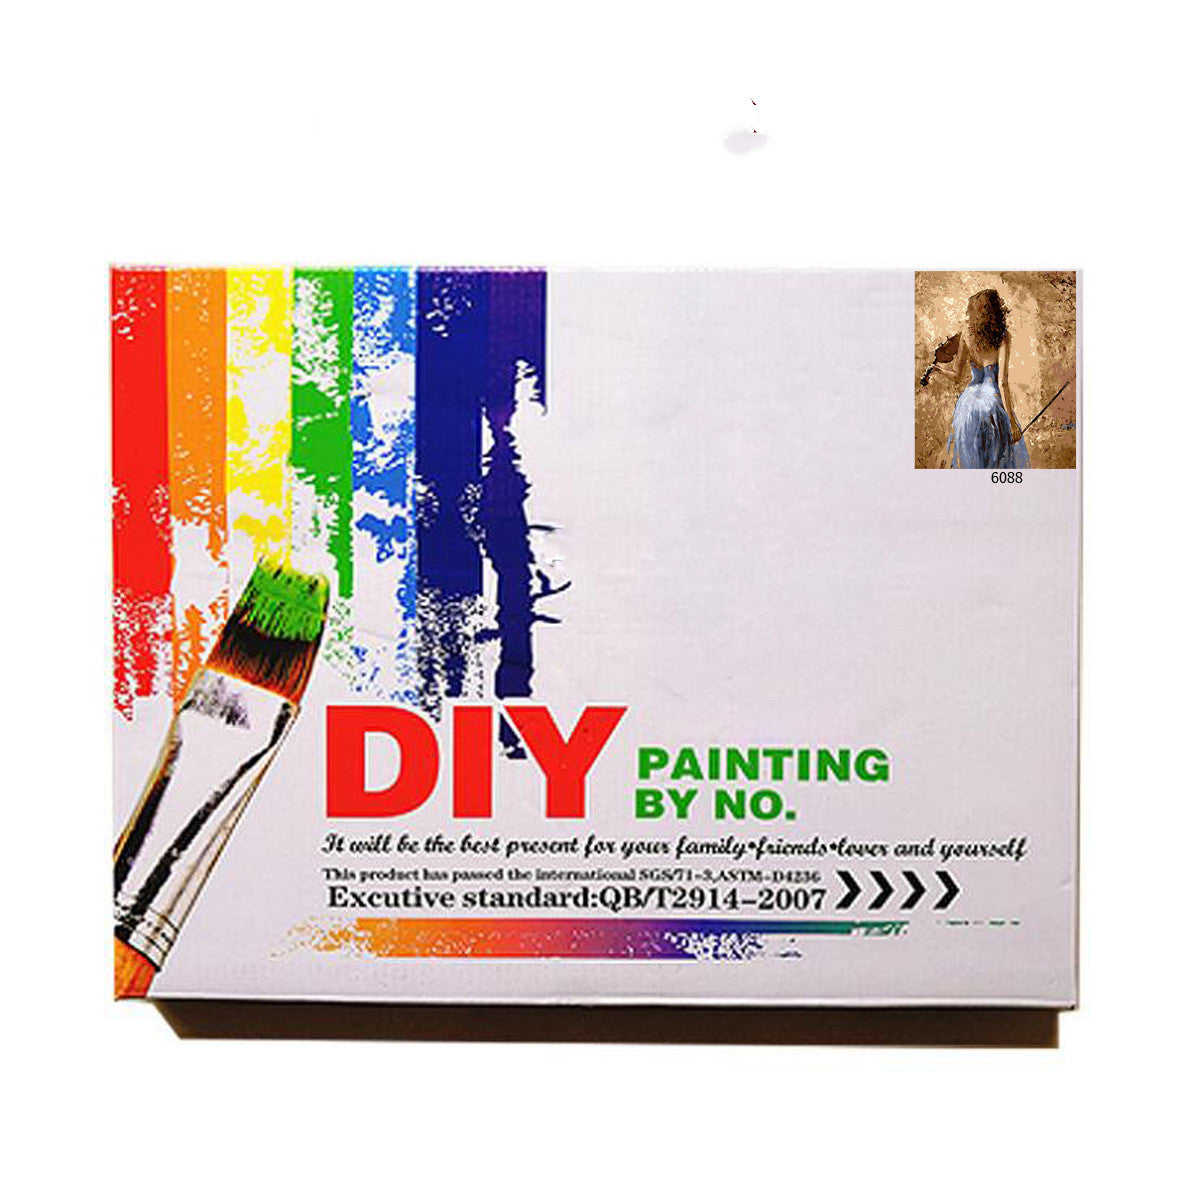 Diy Digital Oil Painting Home Living Room Decoration Painting